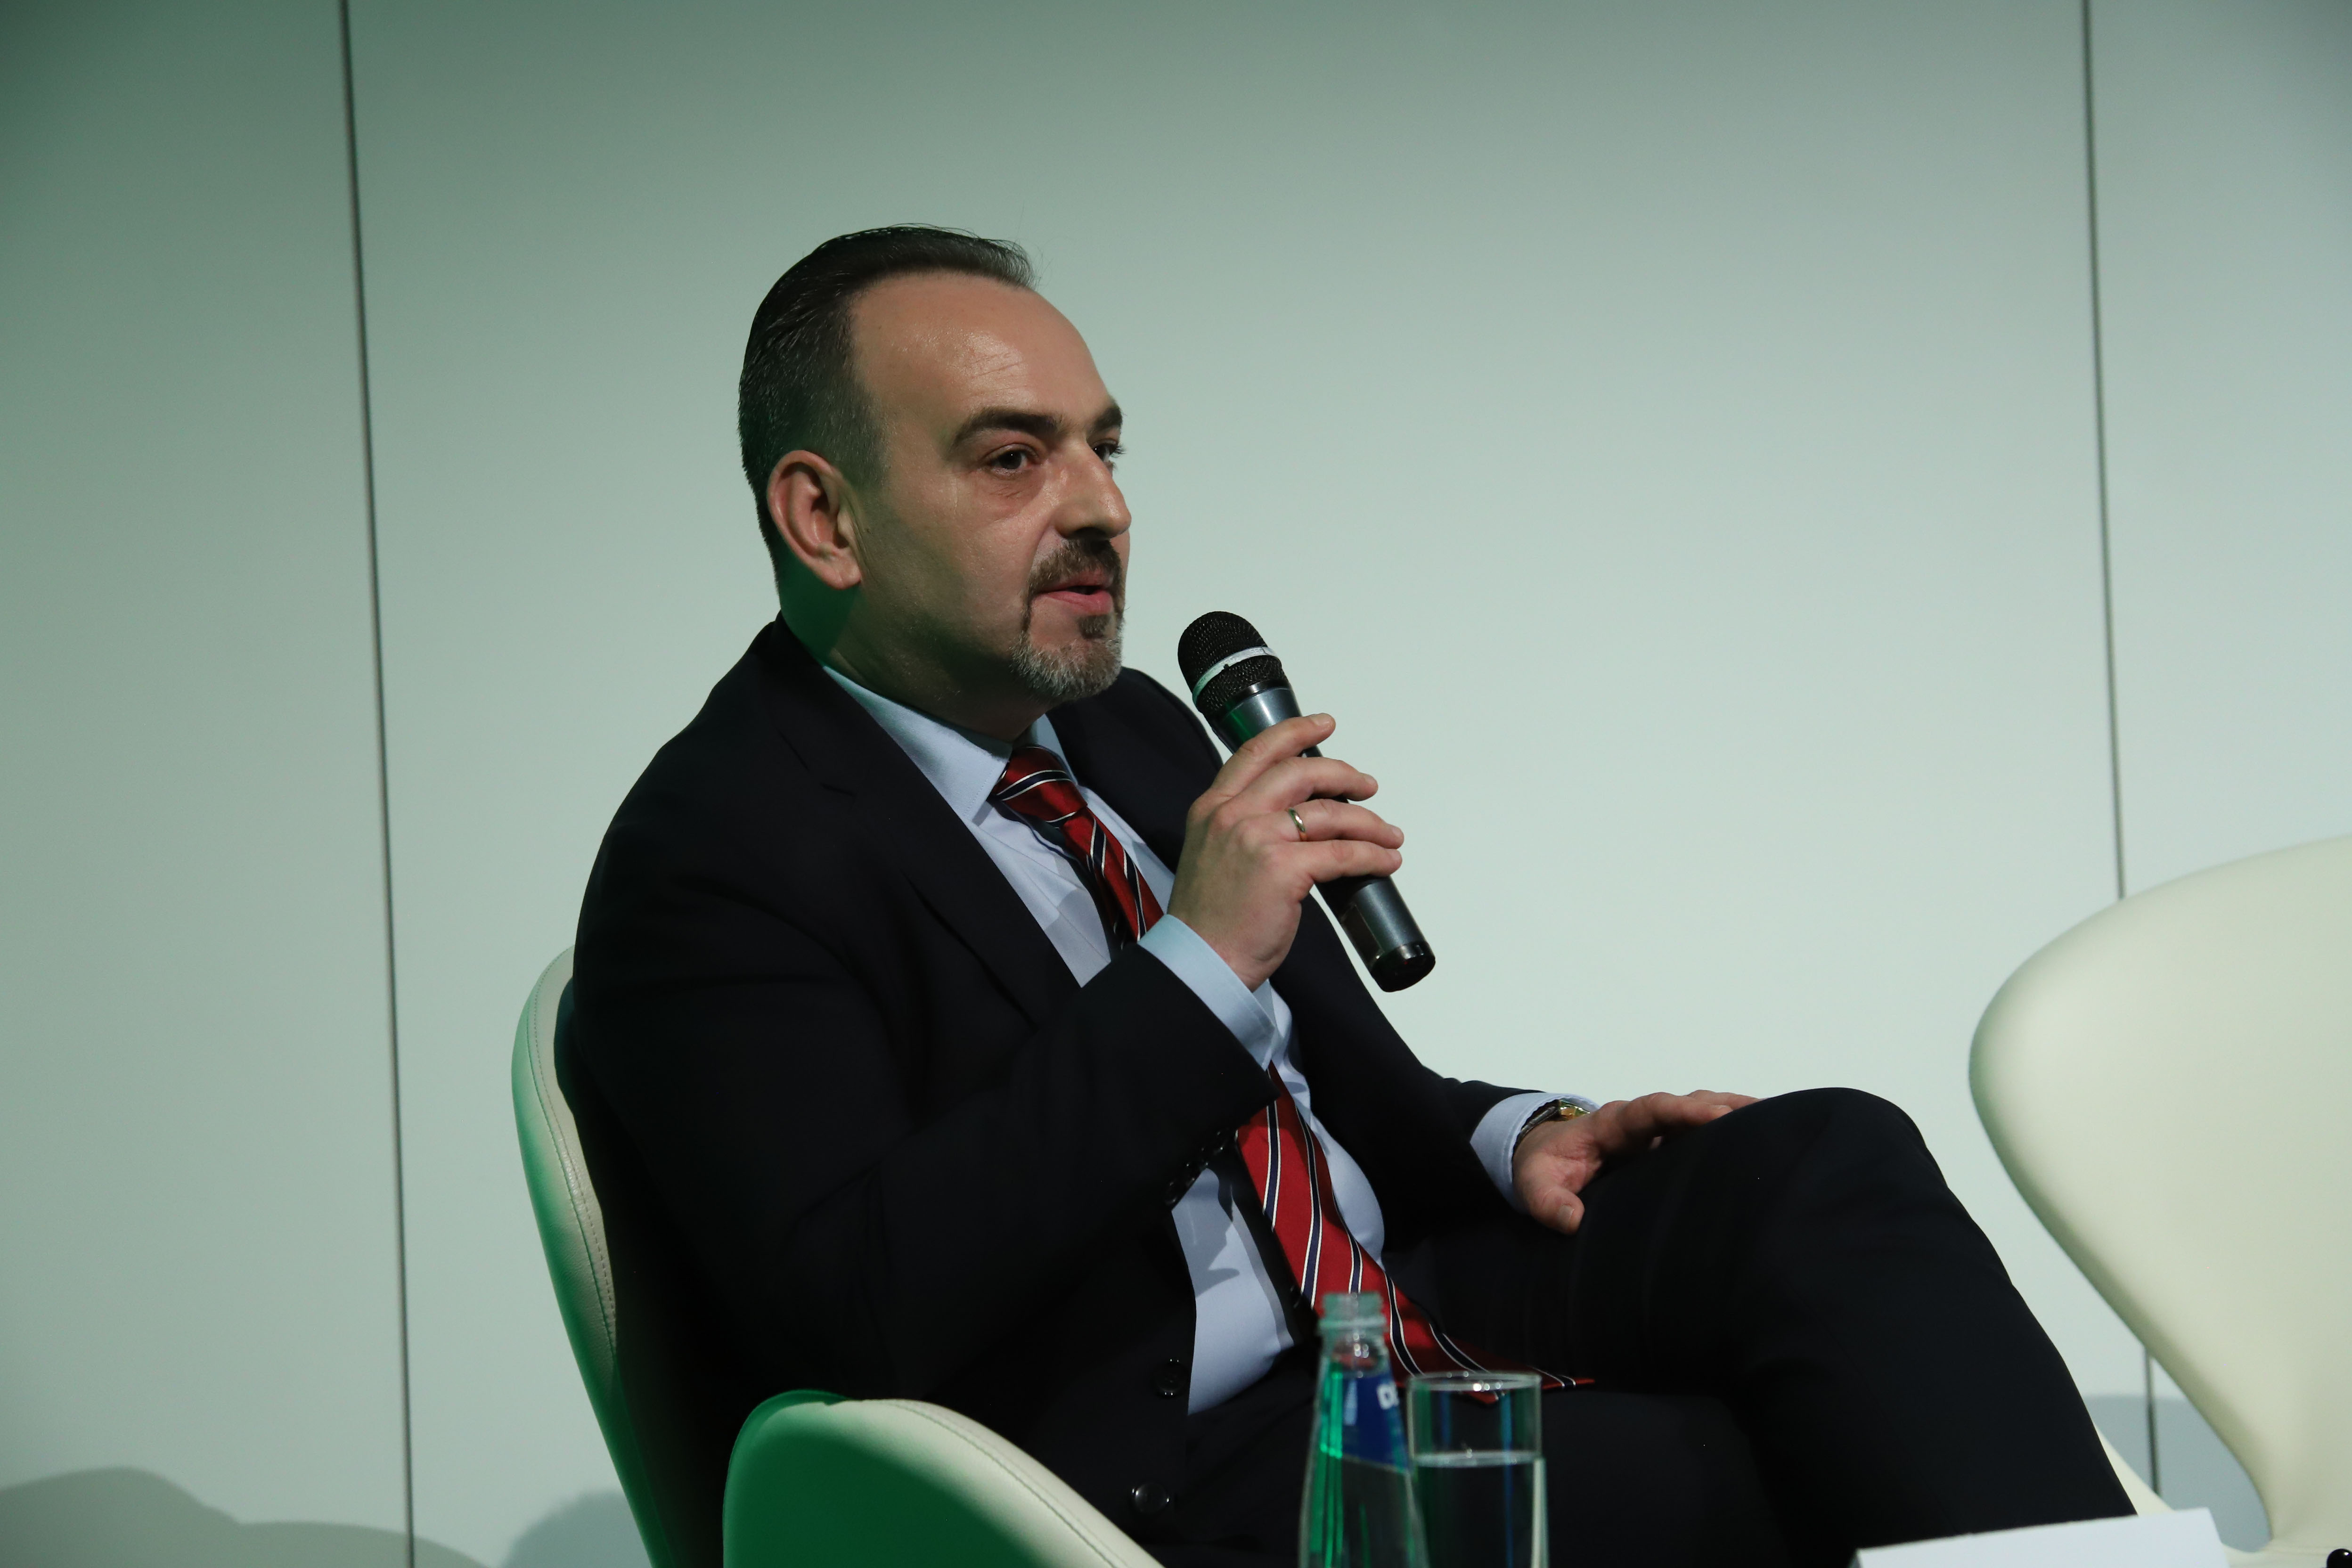 Dobri Mitrev: There are still not enough green projects in Bulgaria